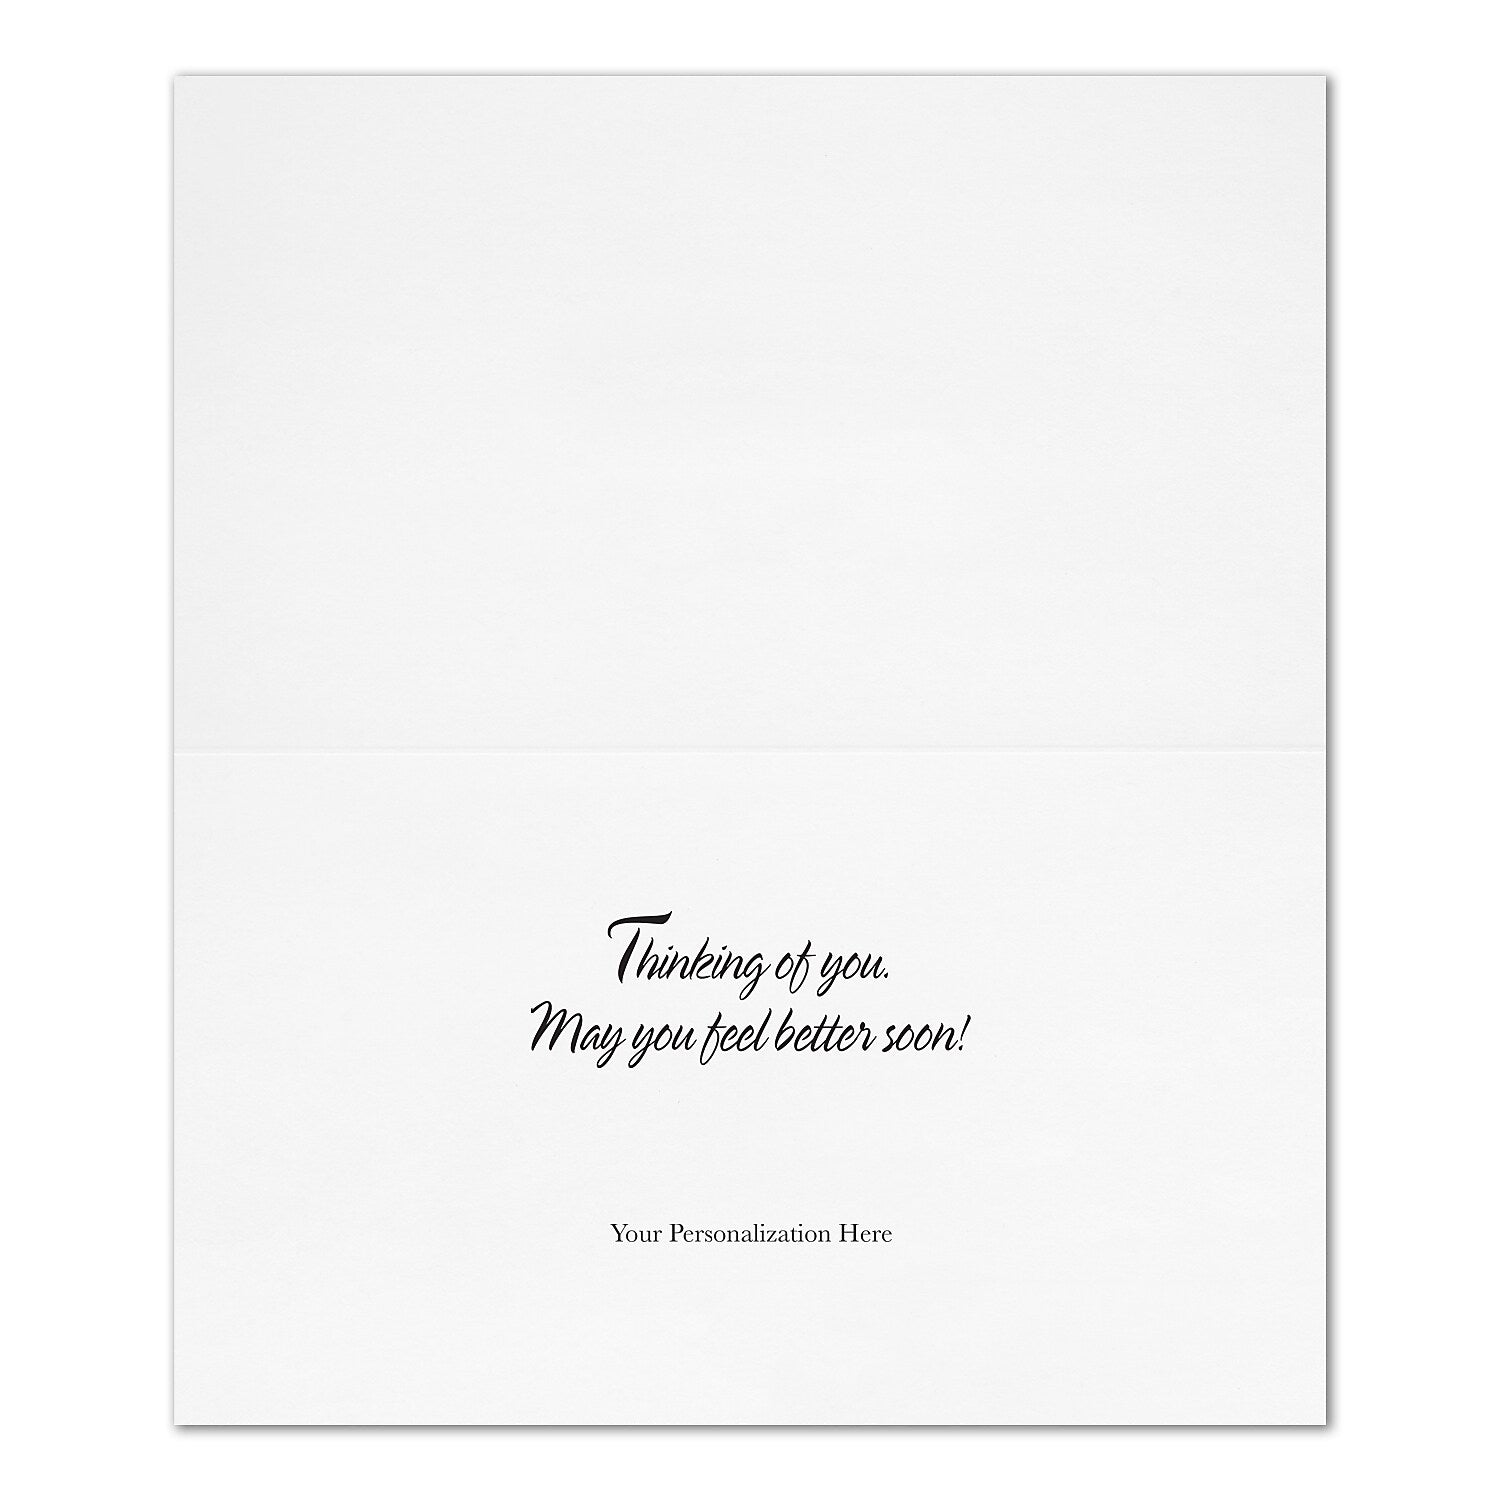 "Get Well Greenery" Card w/ White Unlined Envelope, 100/BX